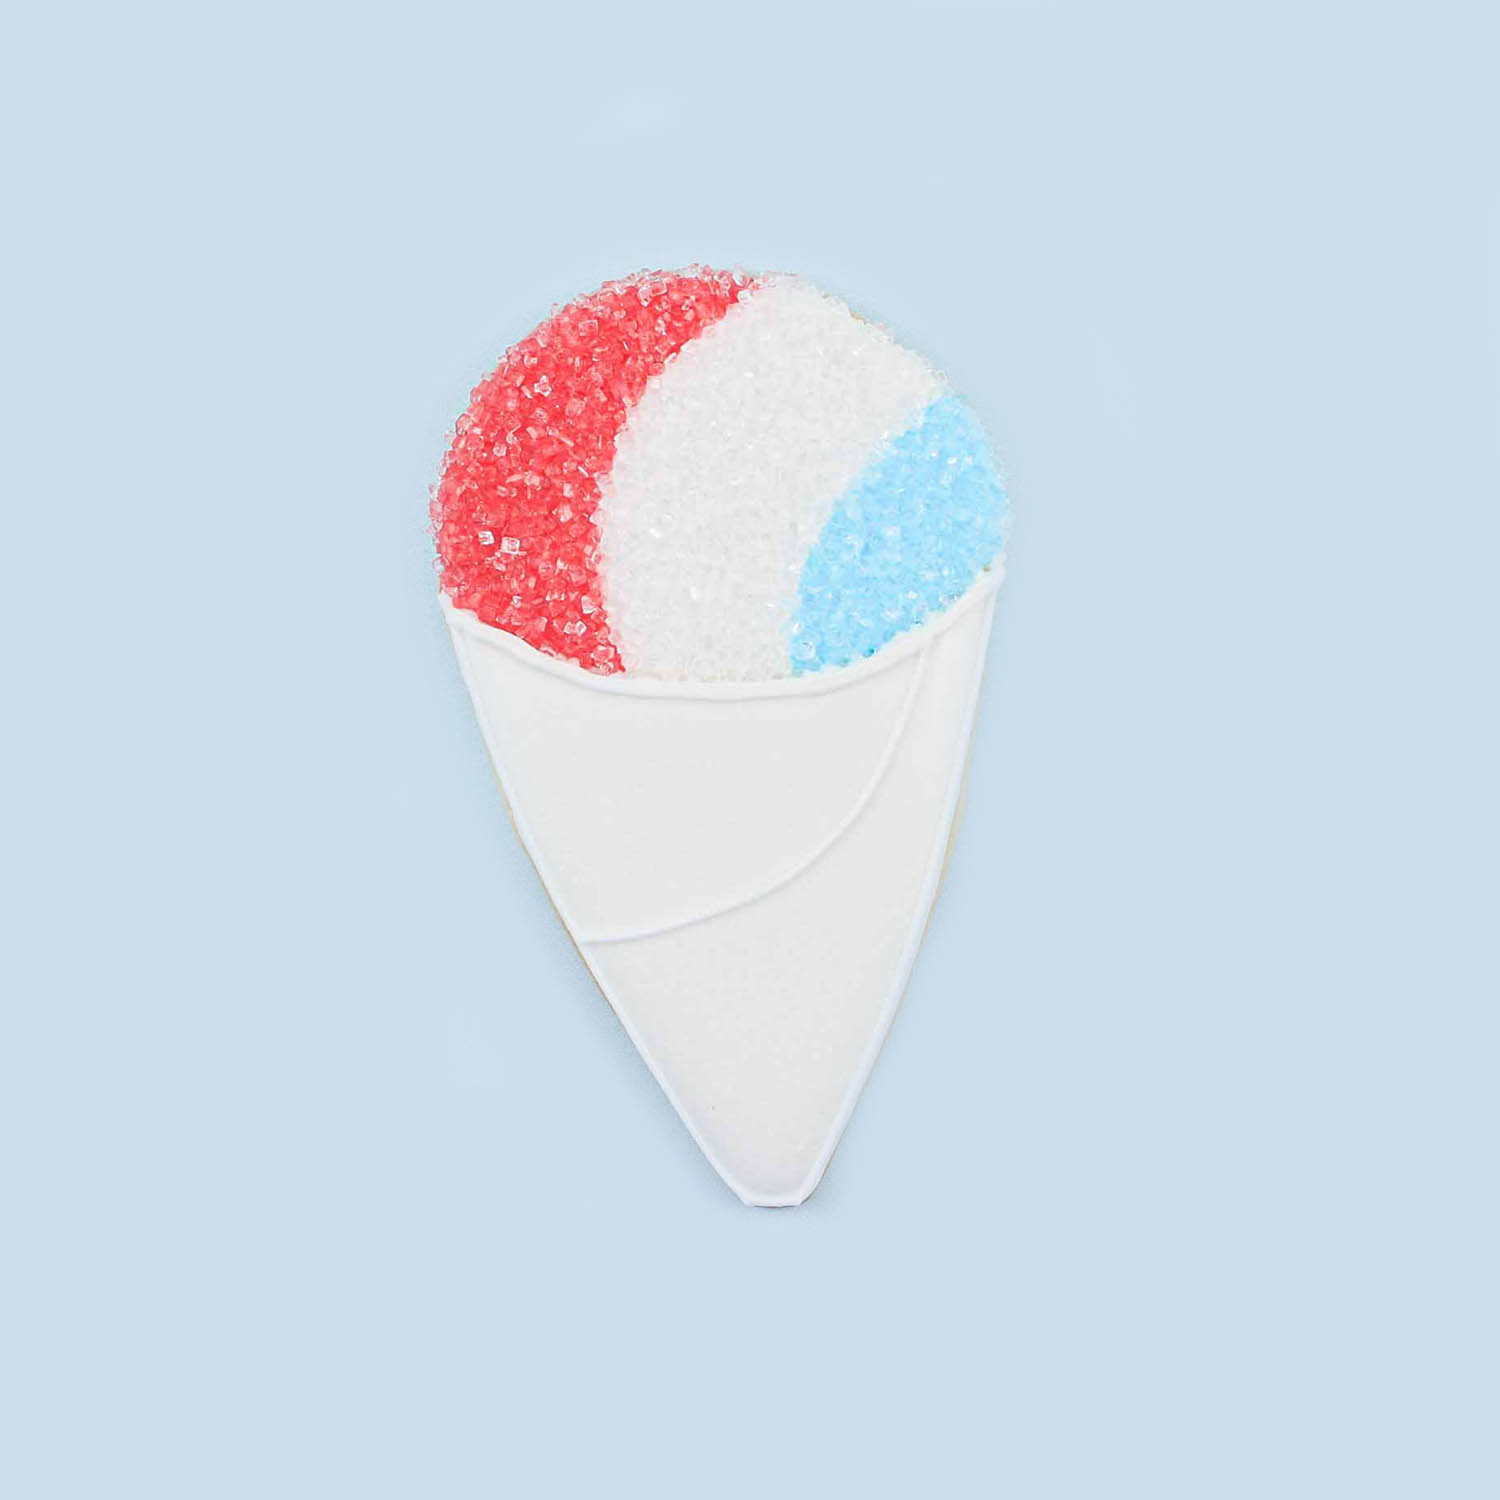 Royal icing decorated snow cone cookie. Shaved ice decorated in coarse sugar crystals